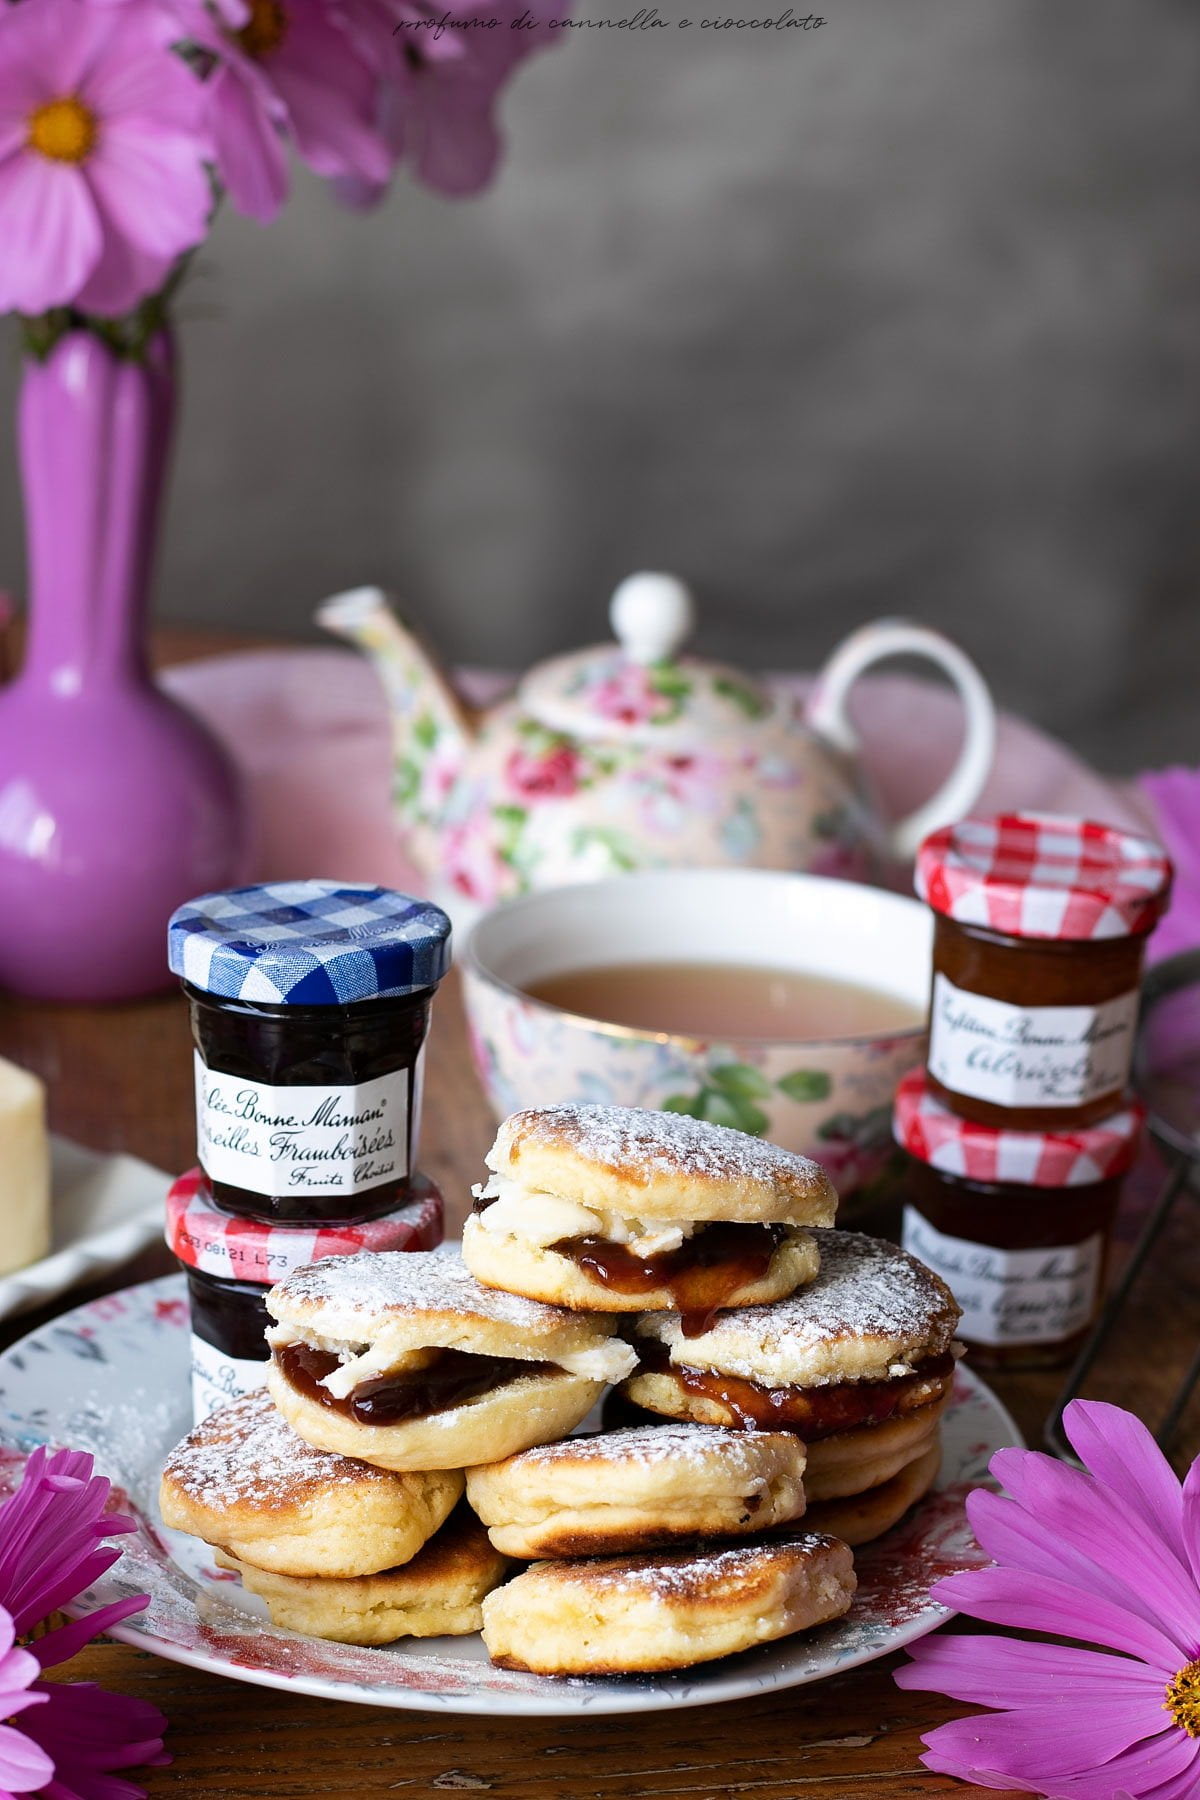 Welsh cakes: biscotti in padella